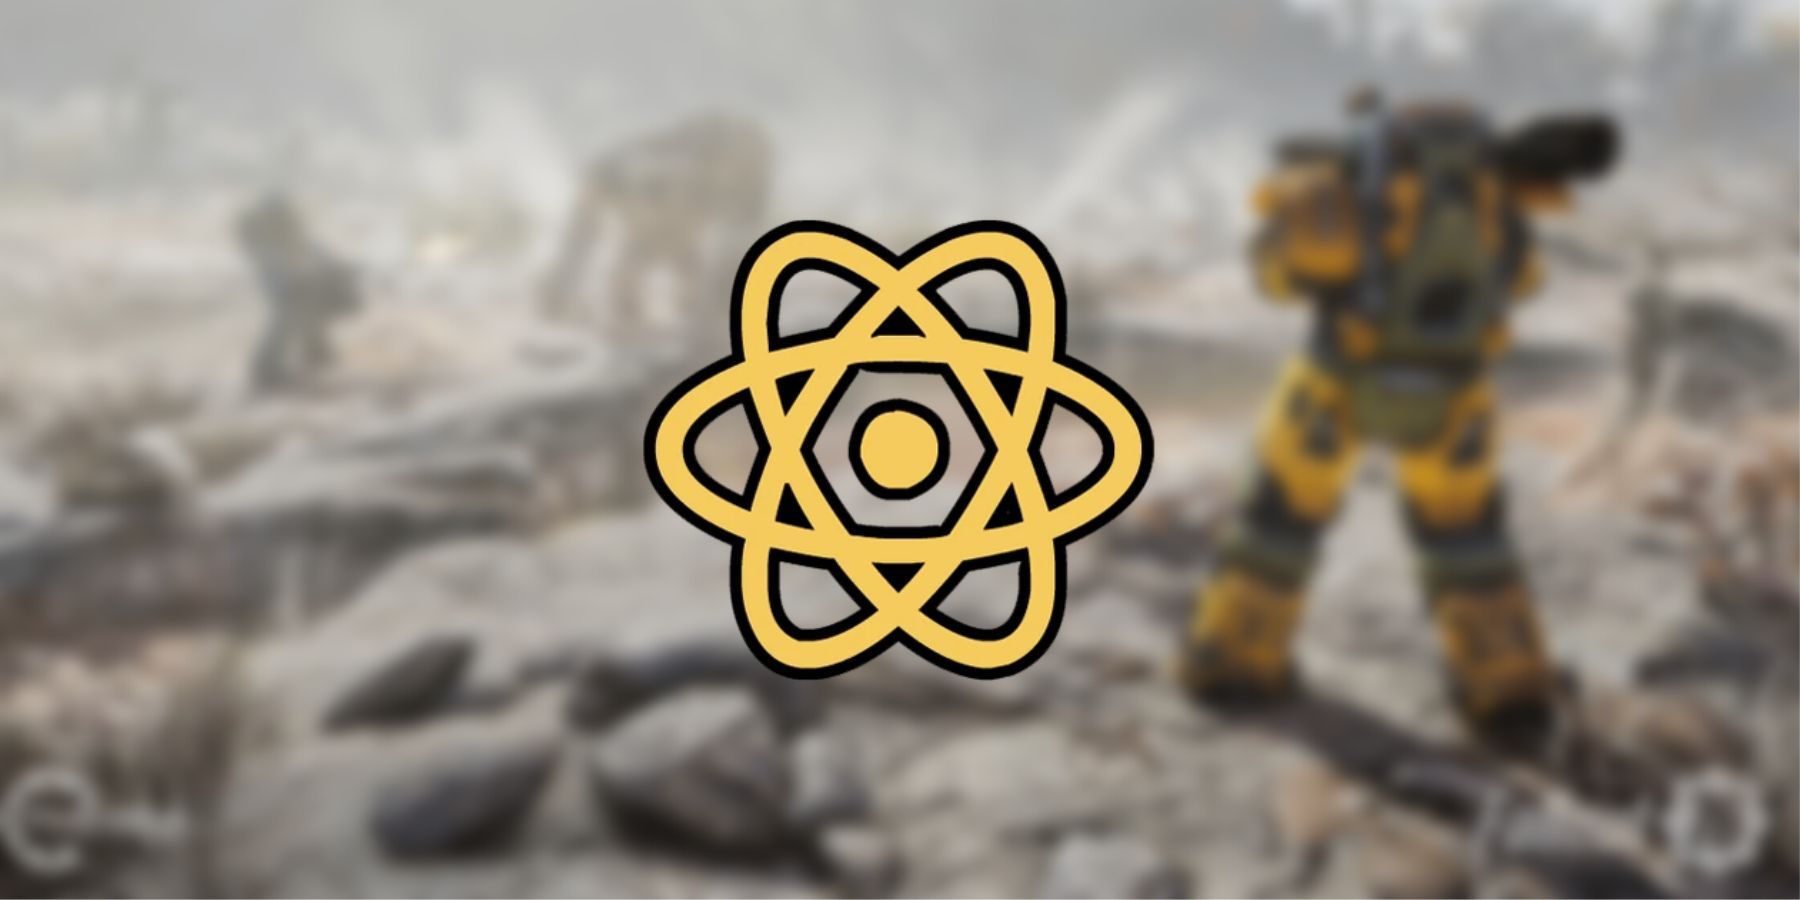 image showing the logo of atom in fallout 76.